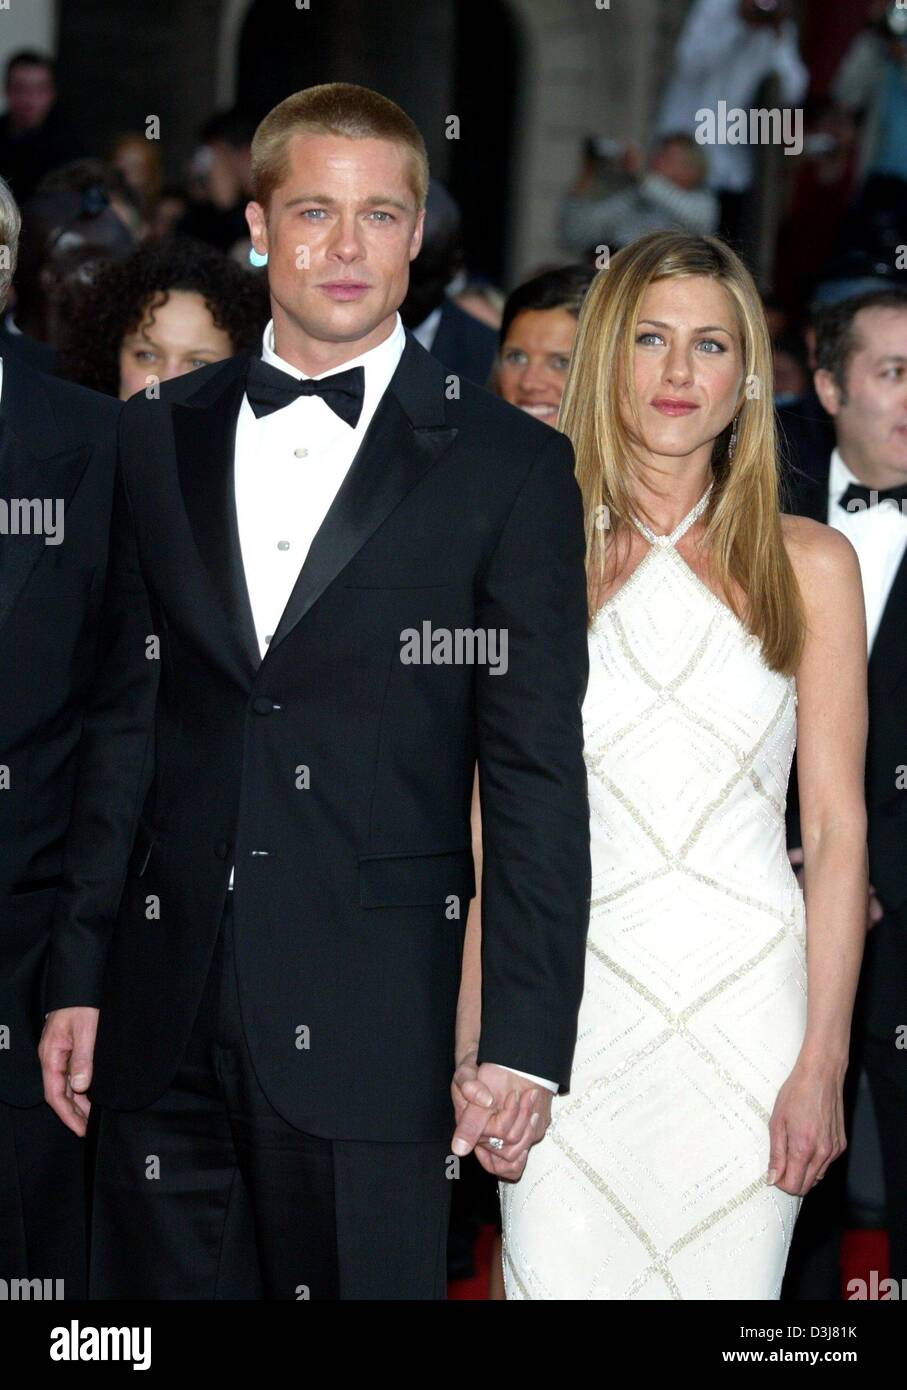 (dpa) - Hollywood star Brad Pitt and his wife Jennifer Aniston pose and hold hands upon their arrival at the presentation of Pitt's new movie 'Troy' at the 57th Film Festival in Cannes, France, 13 May 2004. In the movie Pitt stars as Greek hero Achilles. Stock Photo